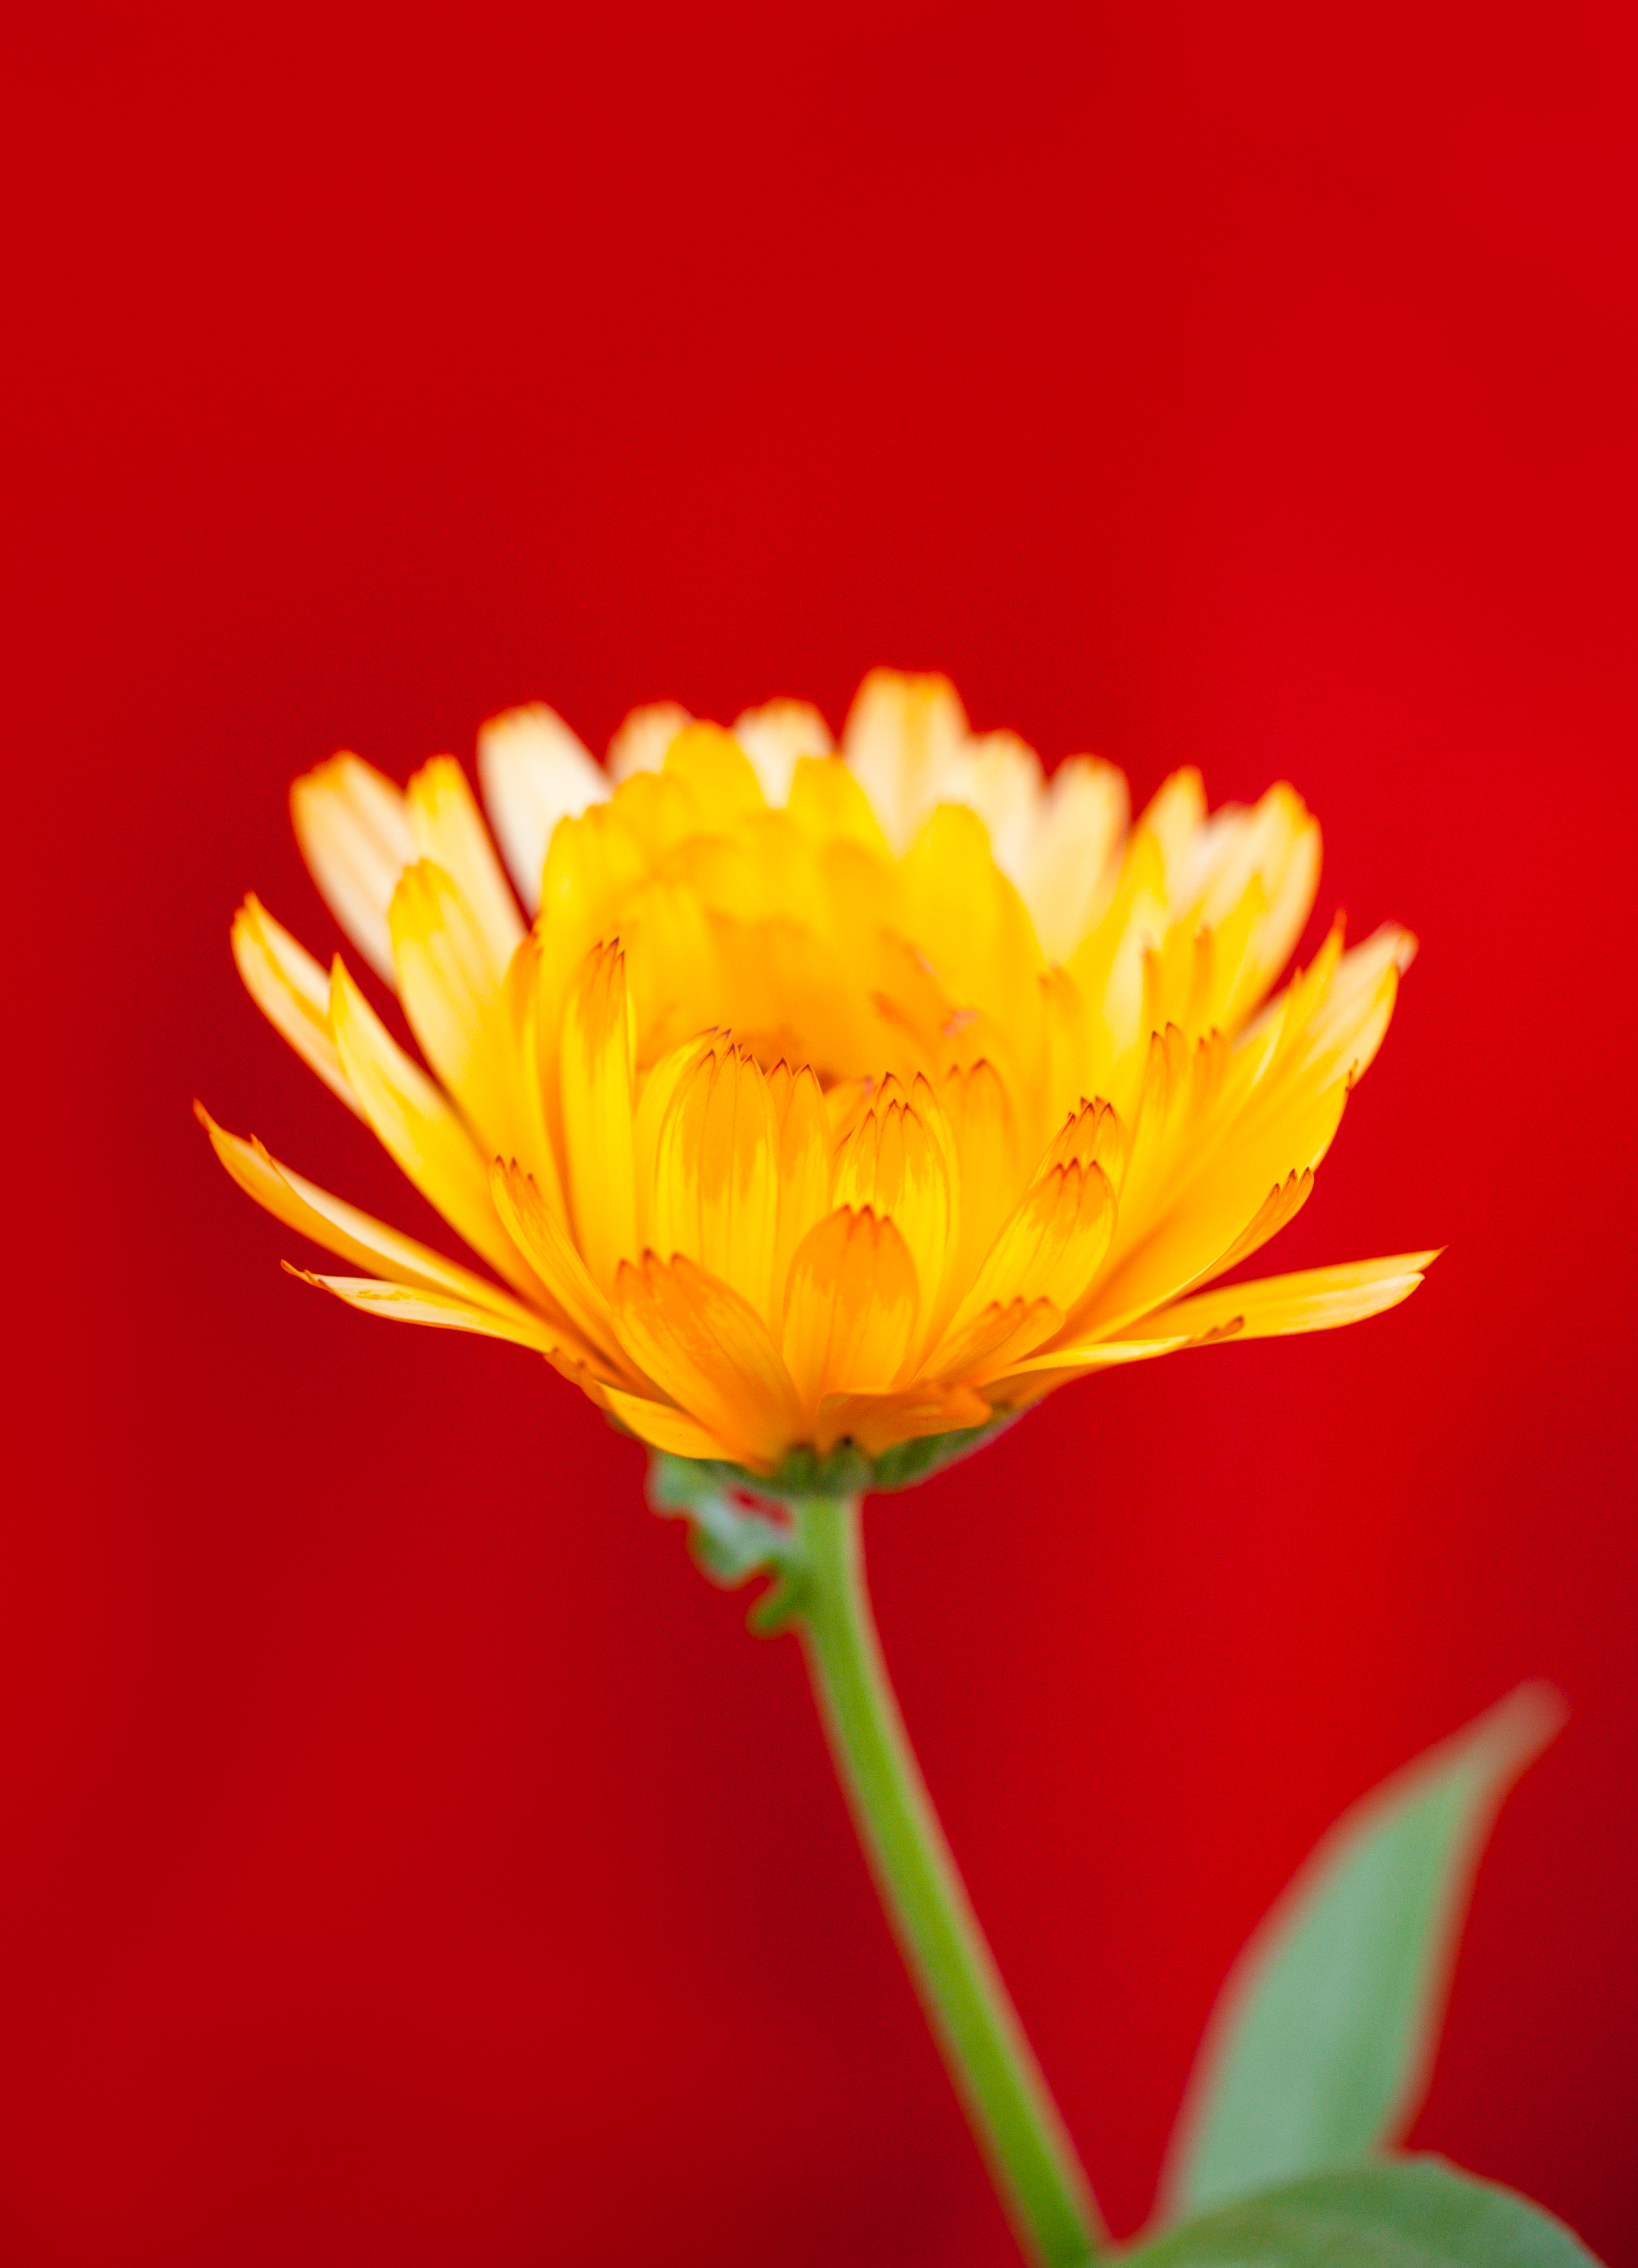 Yellow flower on red background photo